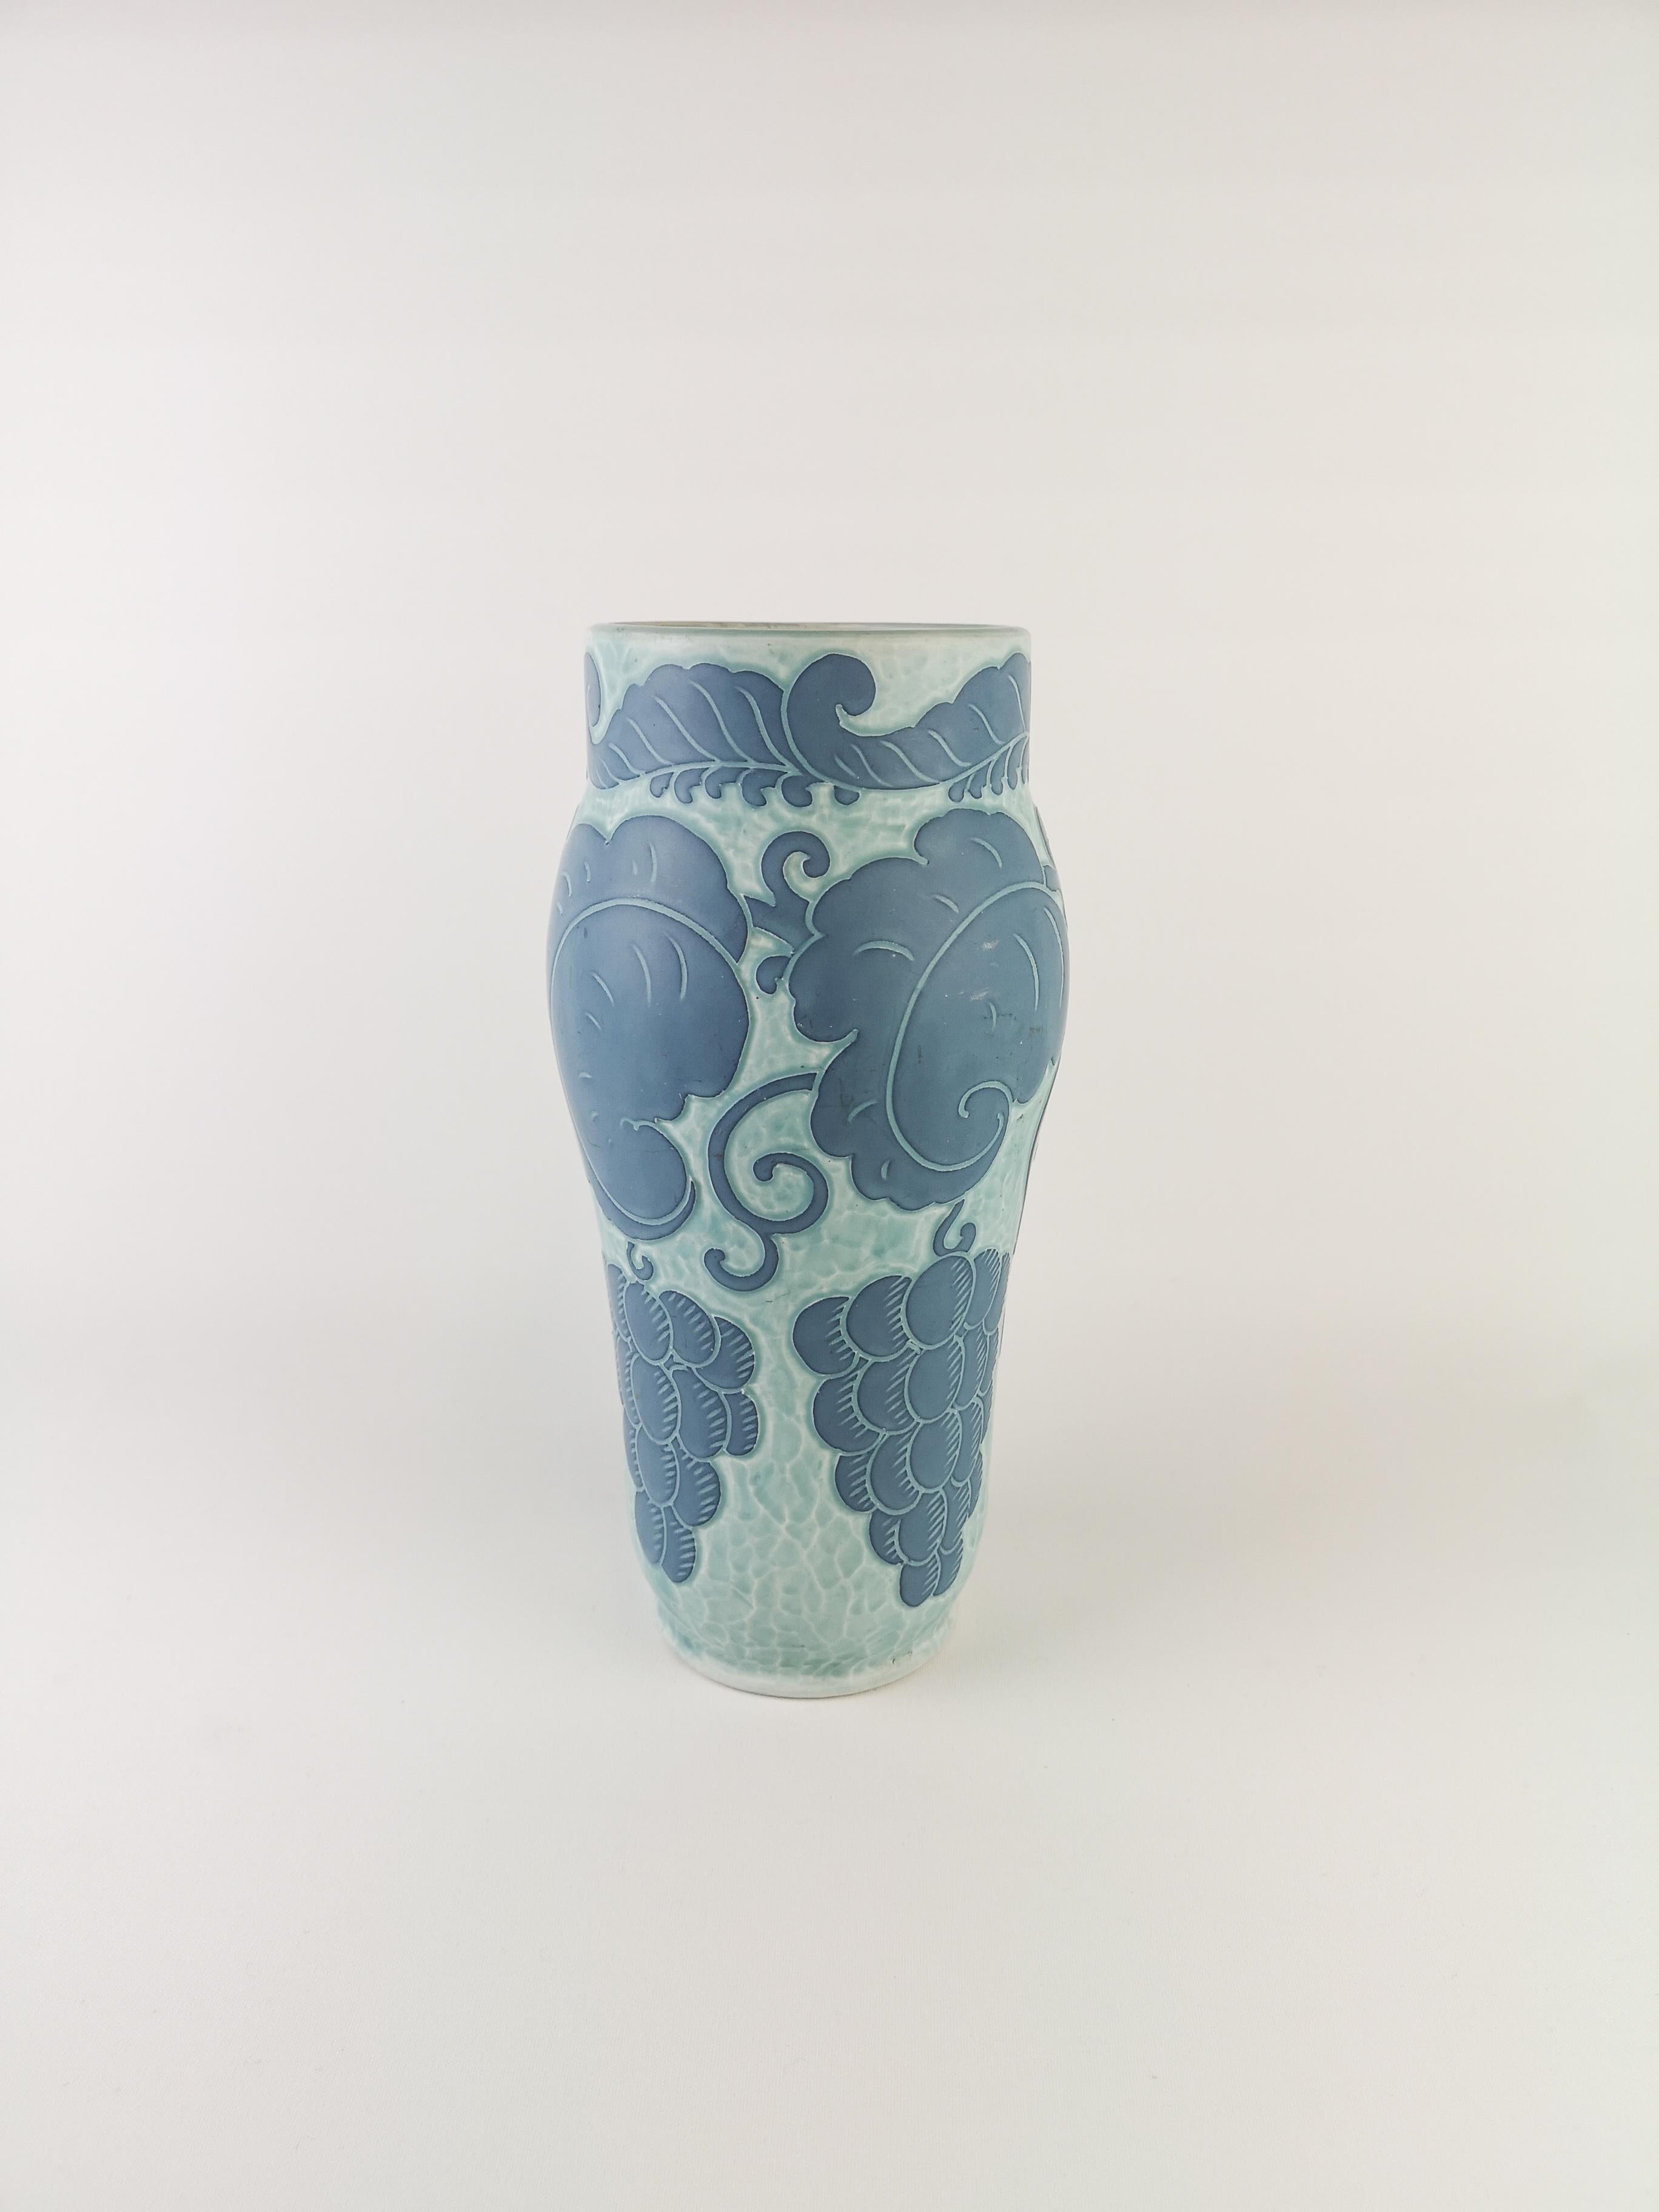 Sgraffito vase decorated with a floral motif, by Josef Ekberg for Gustavsberg.
Sgraffito is a way of combining two layers into a pattern, the second layer is scrapt of and left is a light blue background with a beautiful pattern on top.

Signed